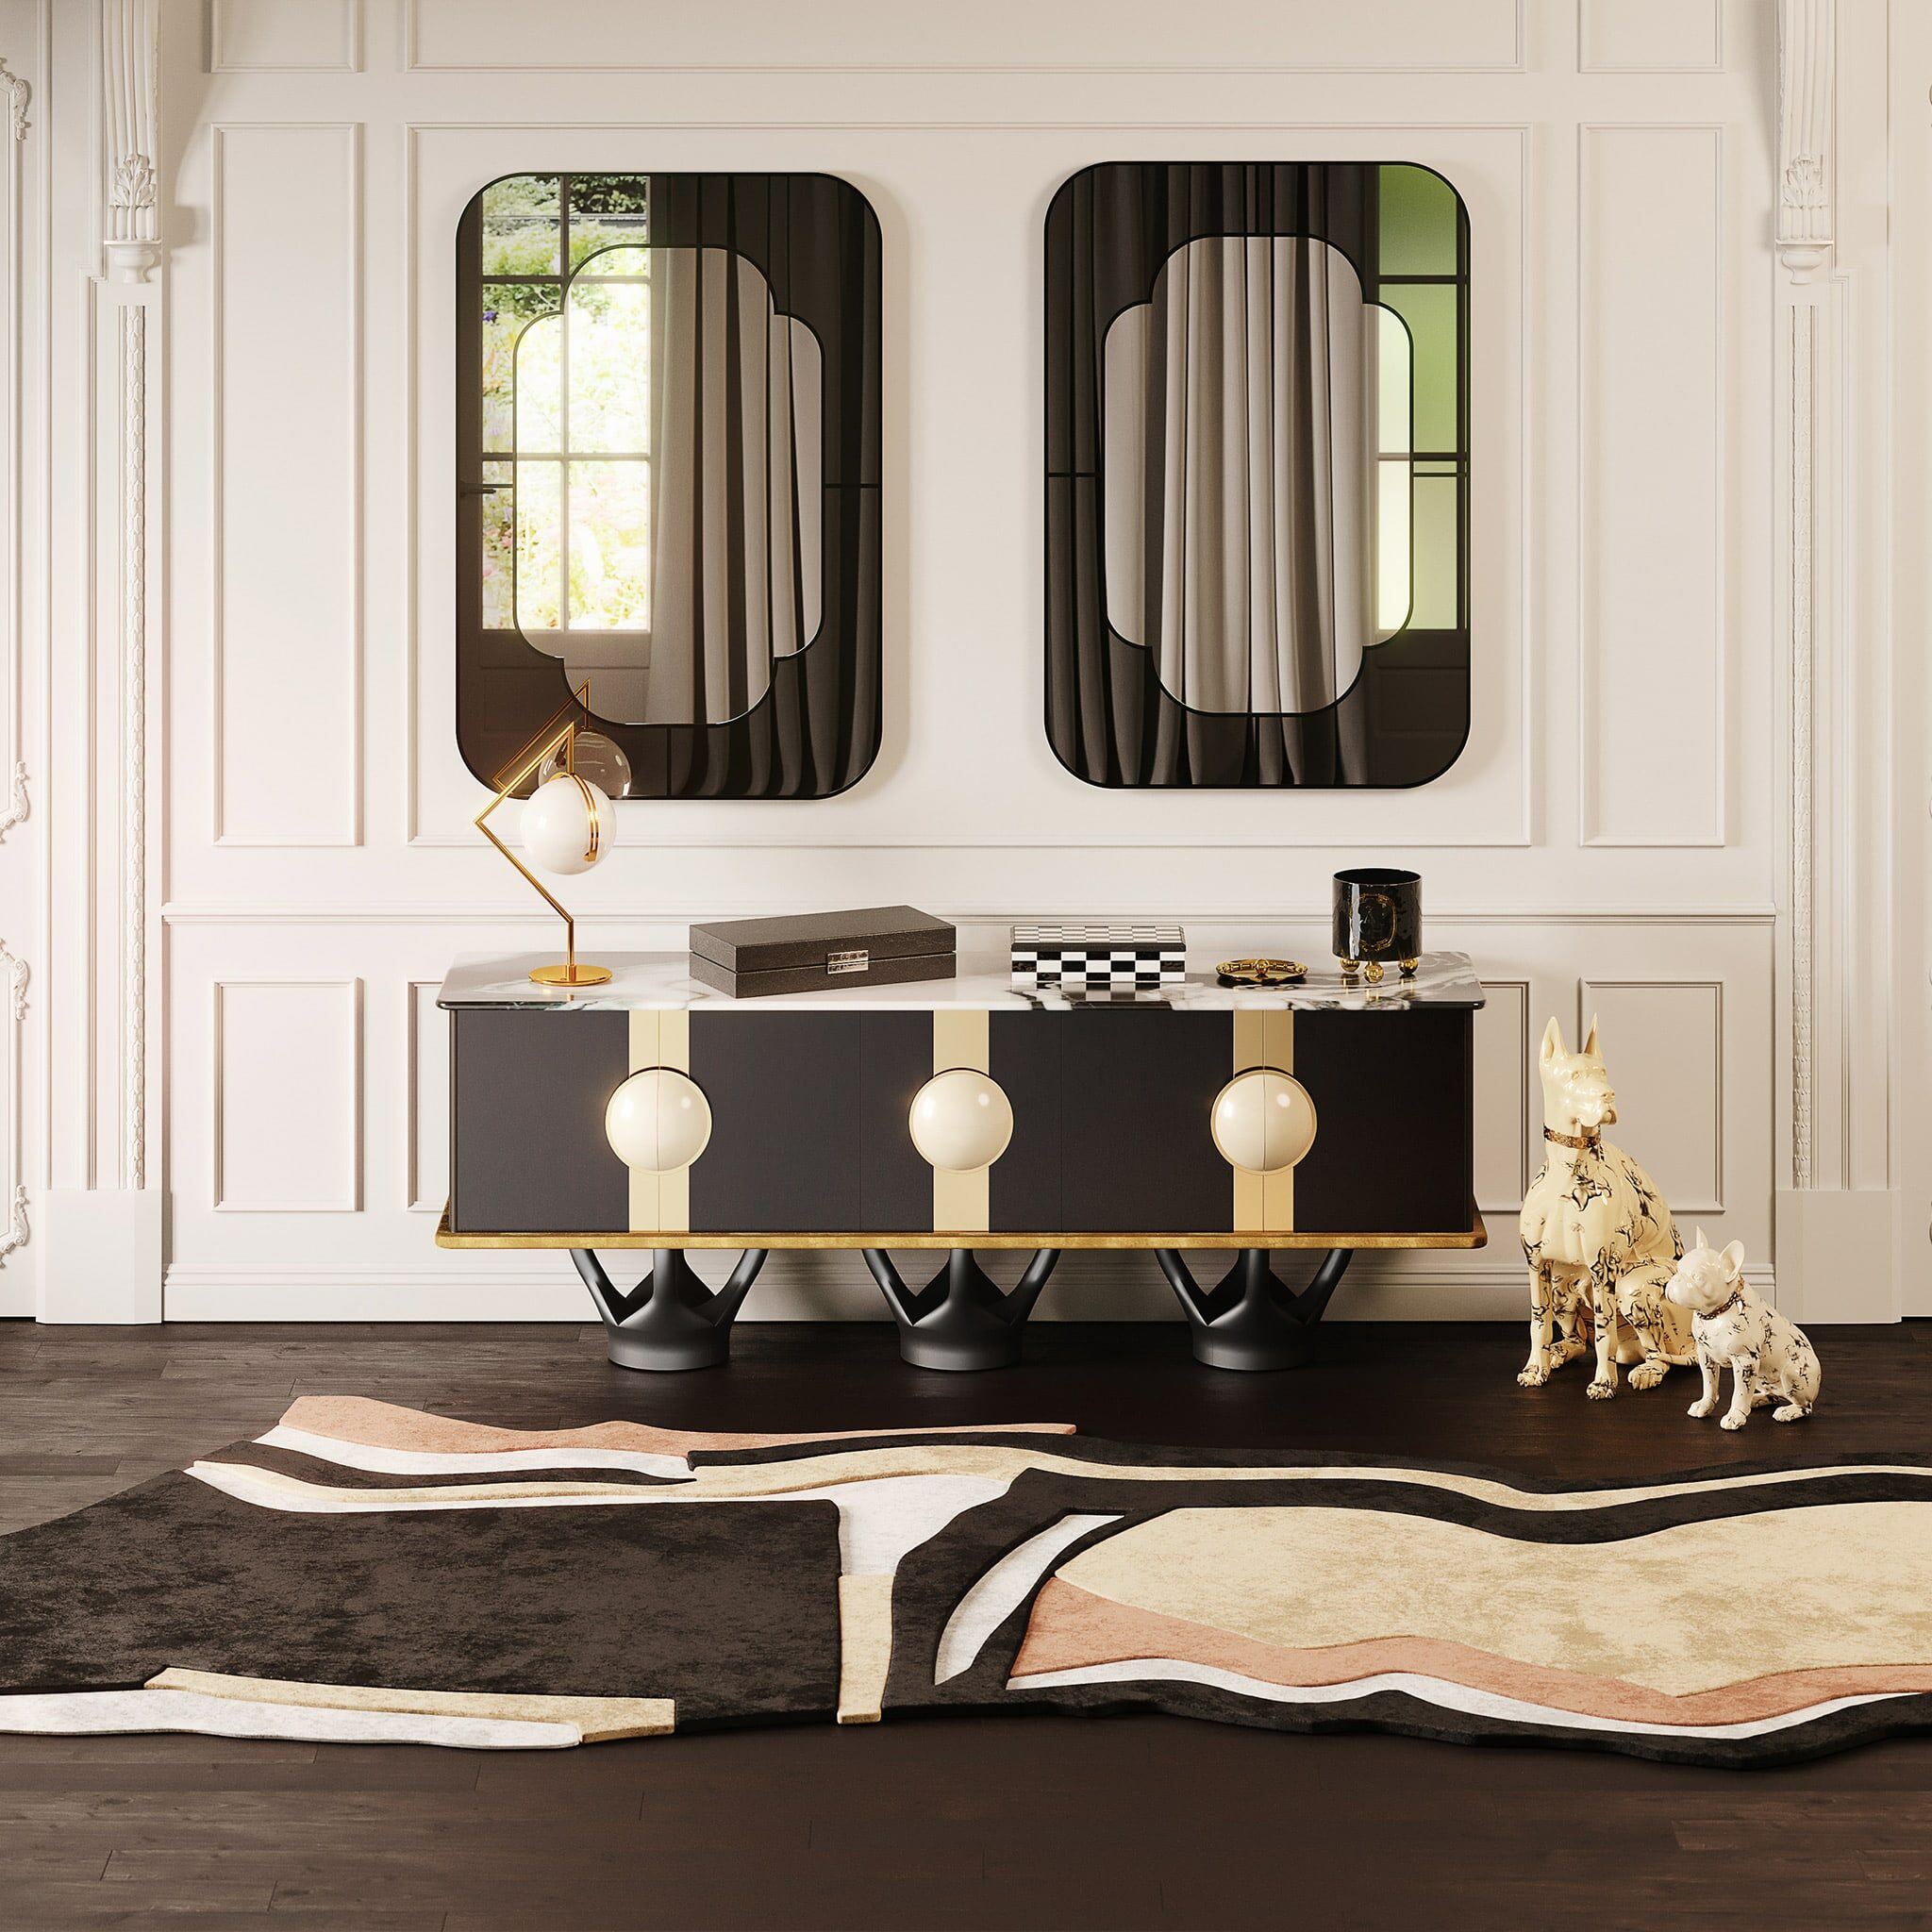 art deco entry way with two mirrored walls and a black sideboard showing what is art deco furniture
